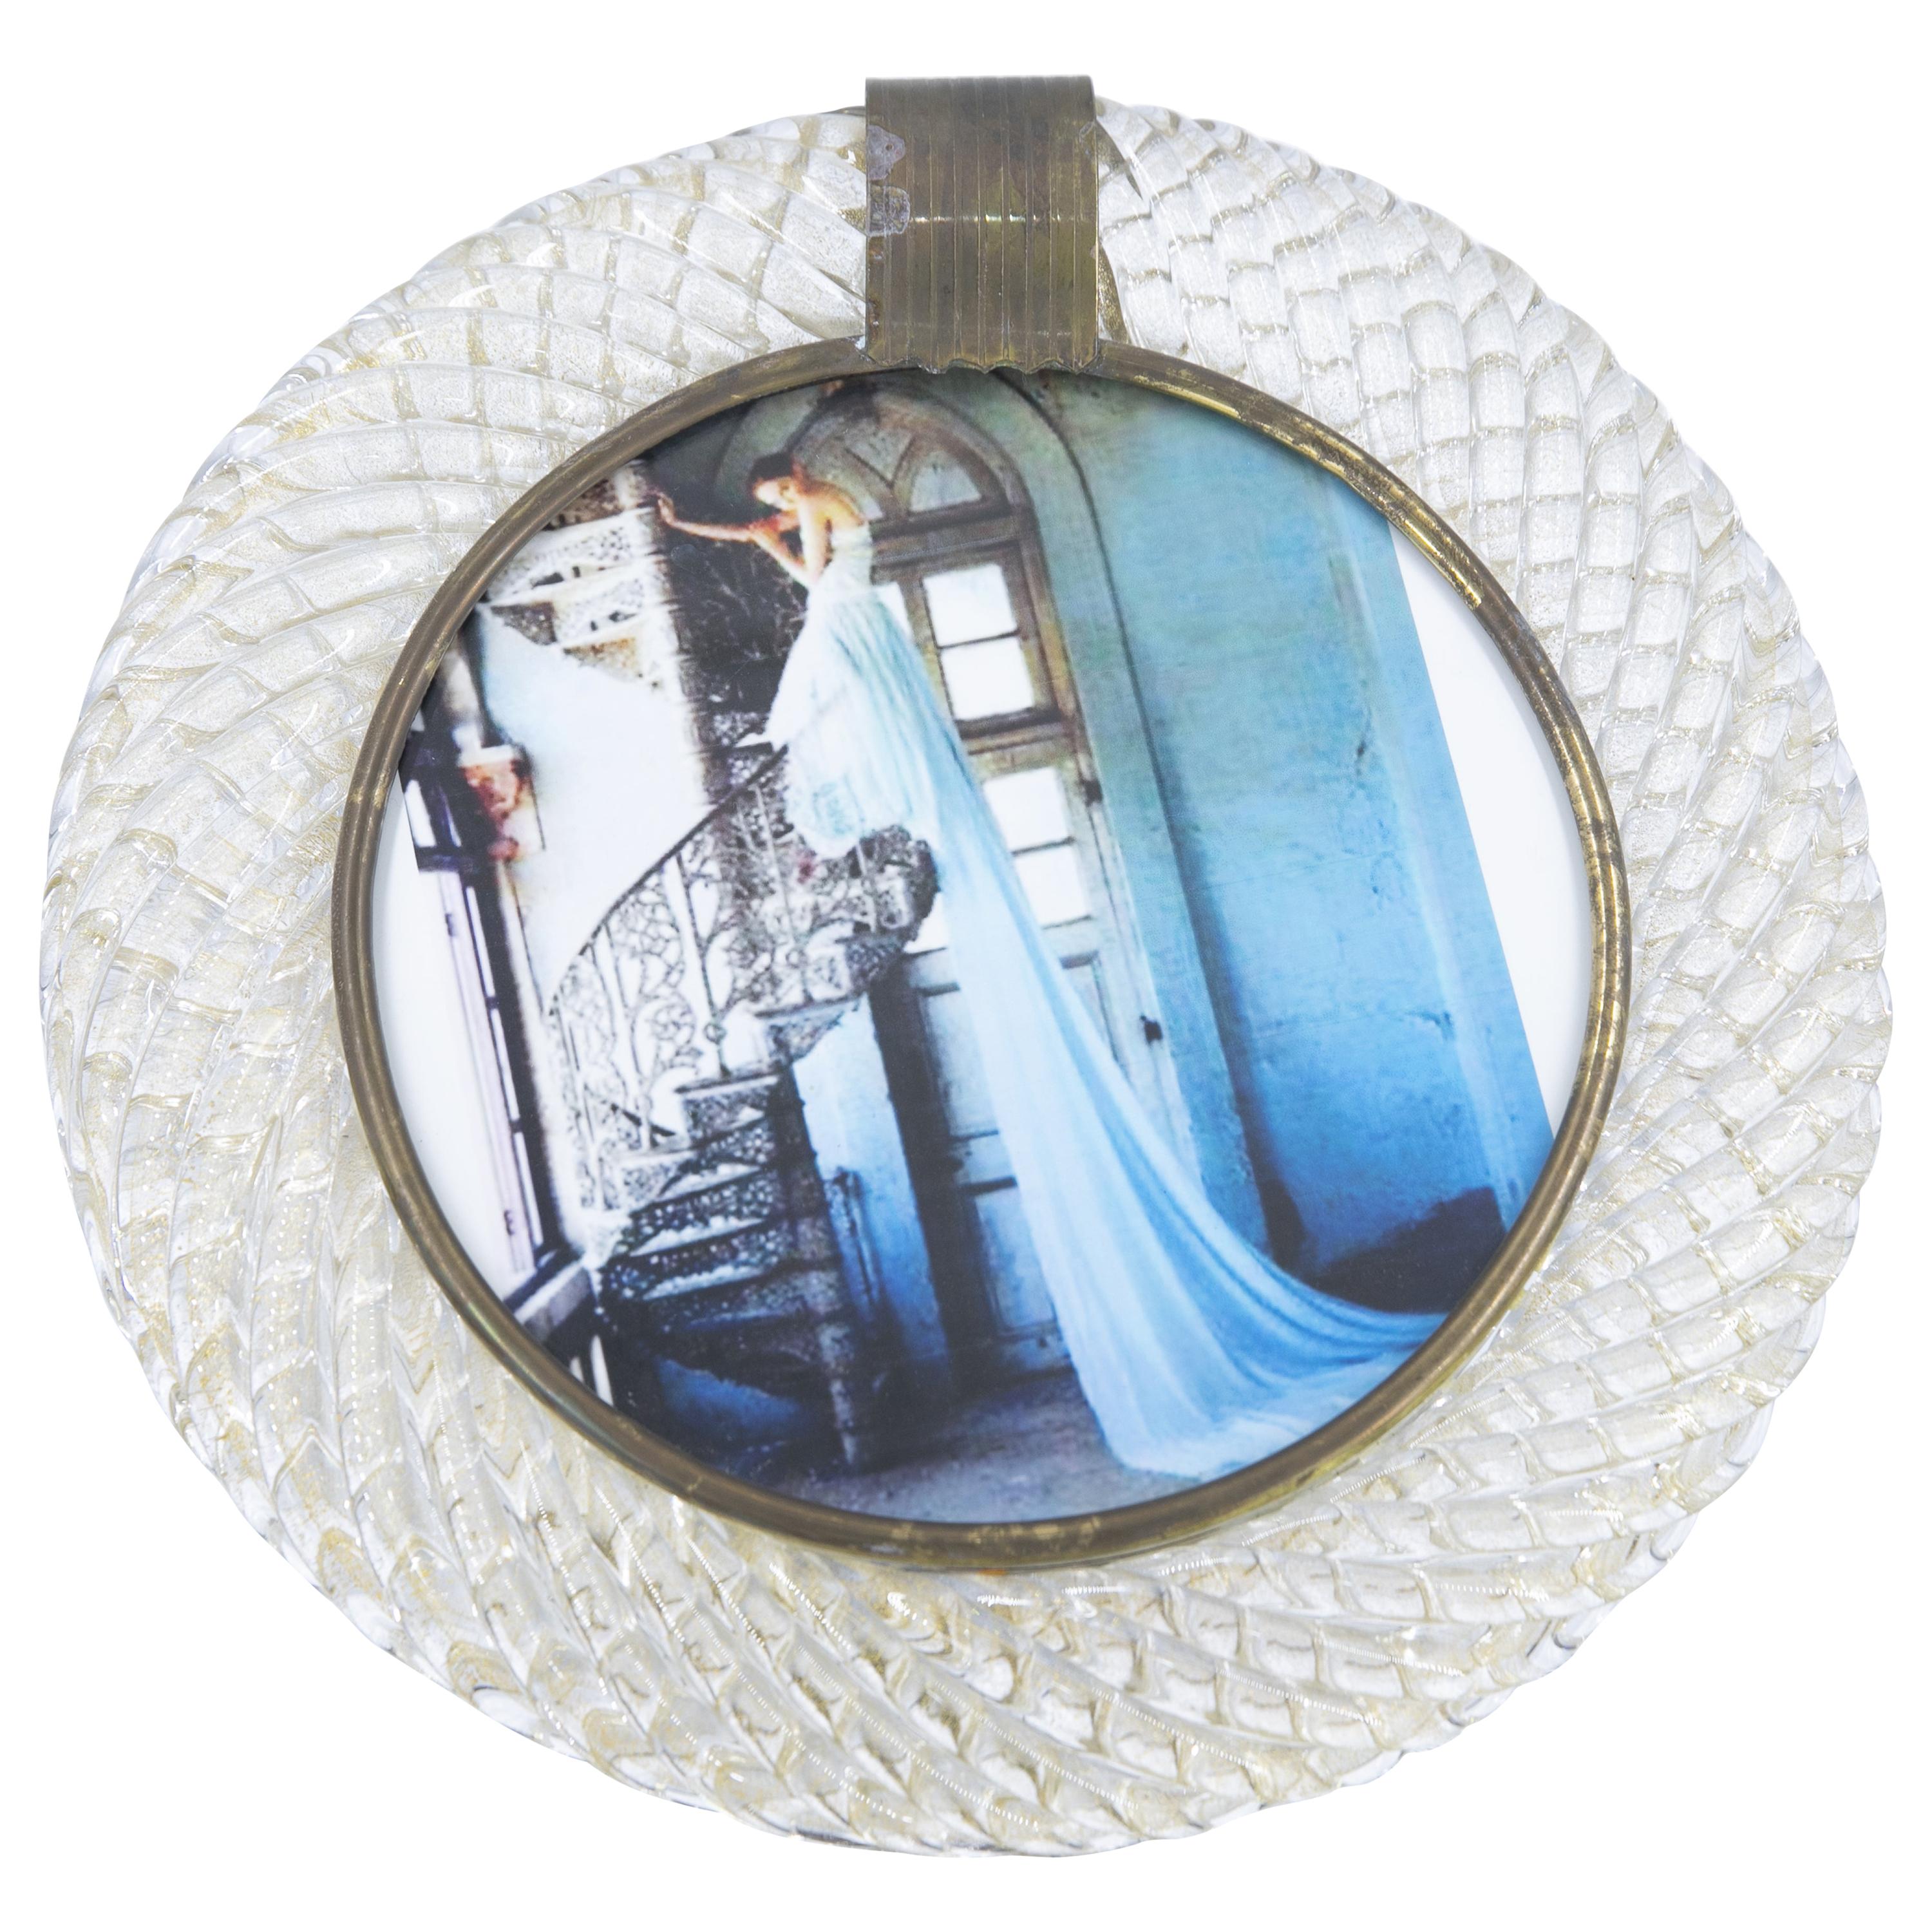 Murano Glass Round Picture Frame, Barovier & Toso Furnace, Made in Italy, 1980s